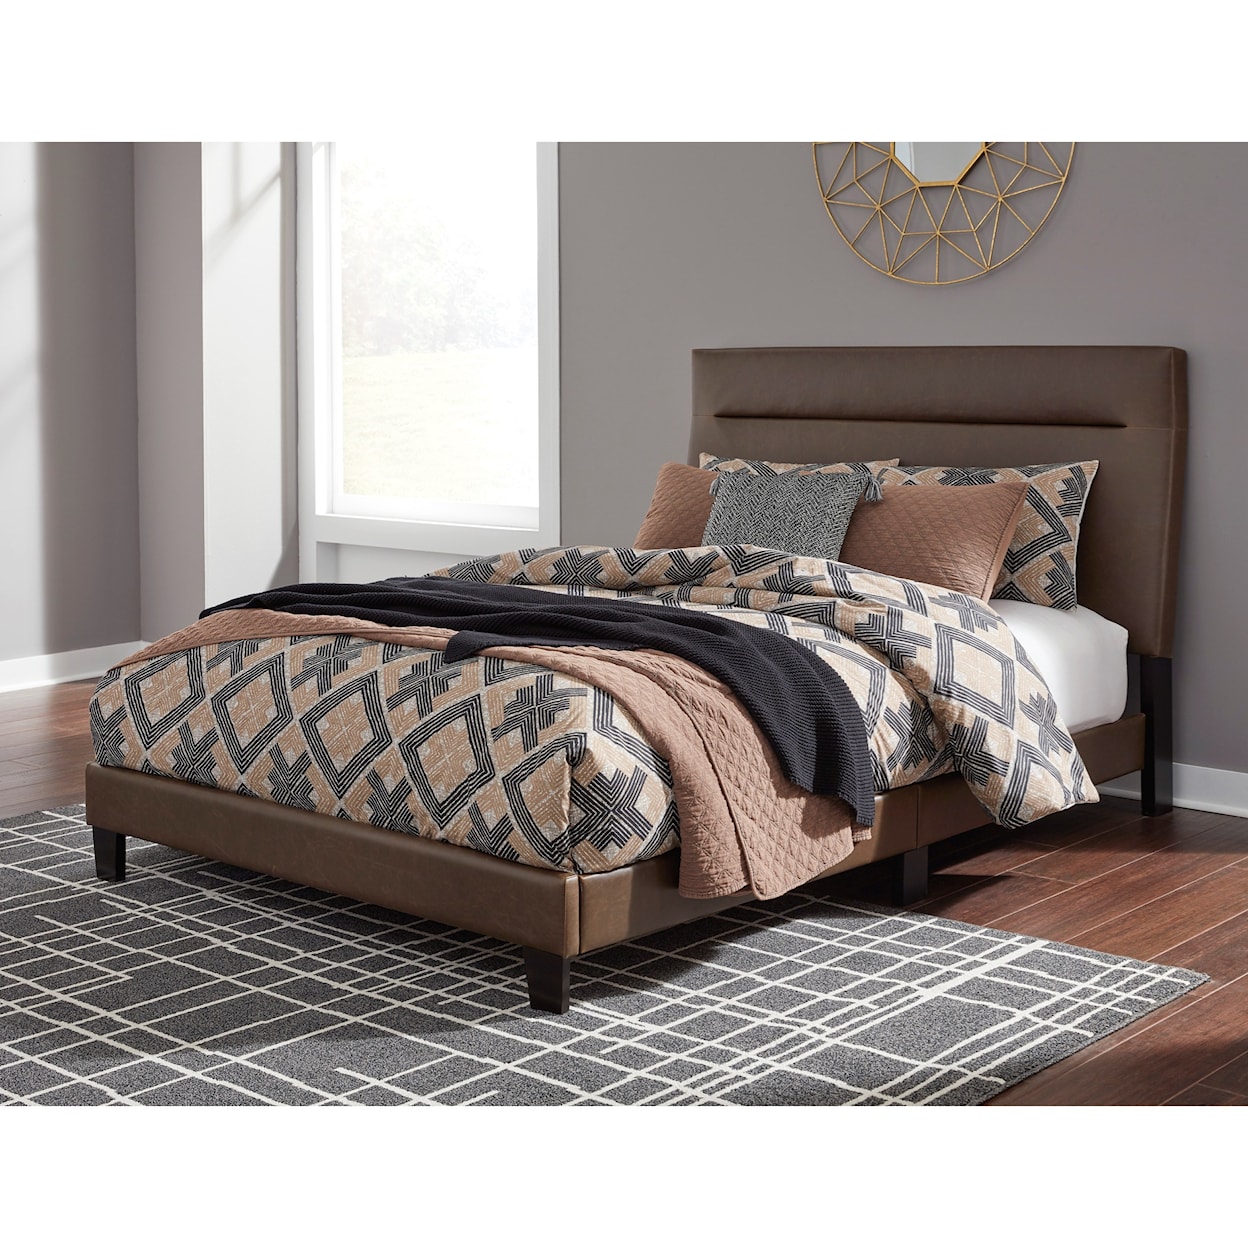 Michael Alan Select Adelloni Queen Upholstered Bed